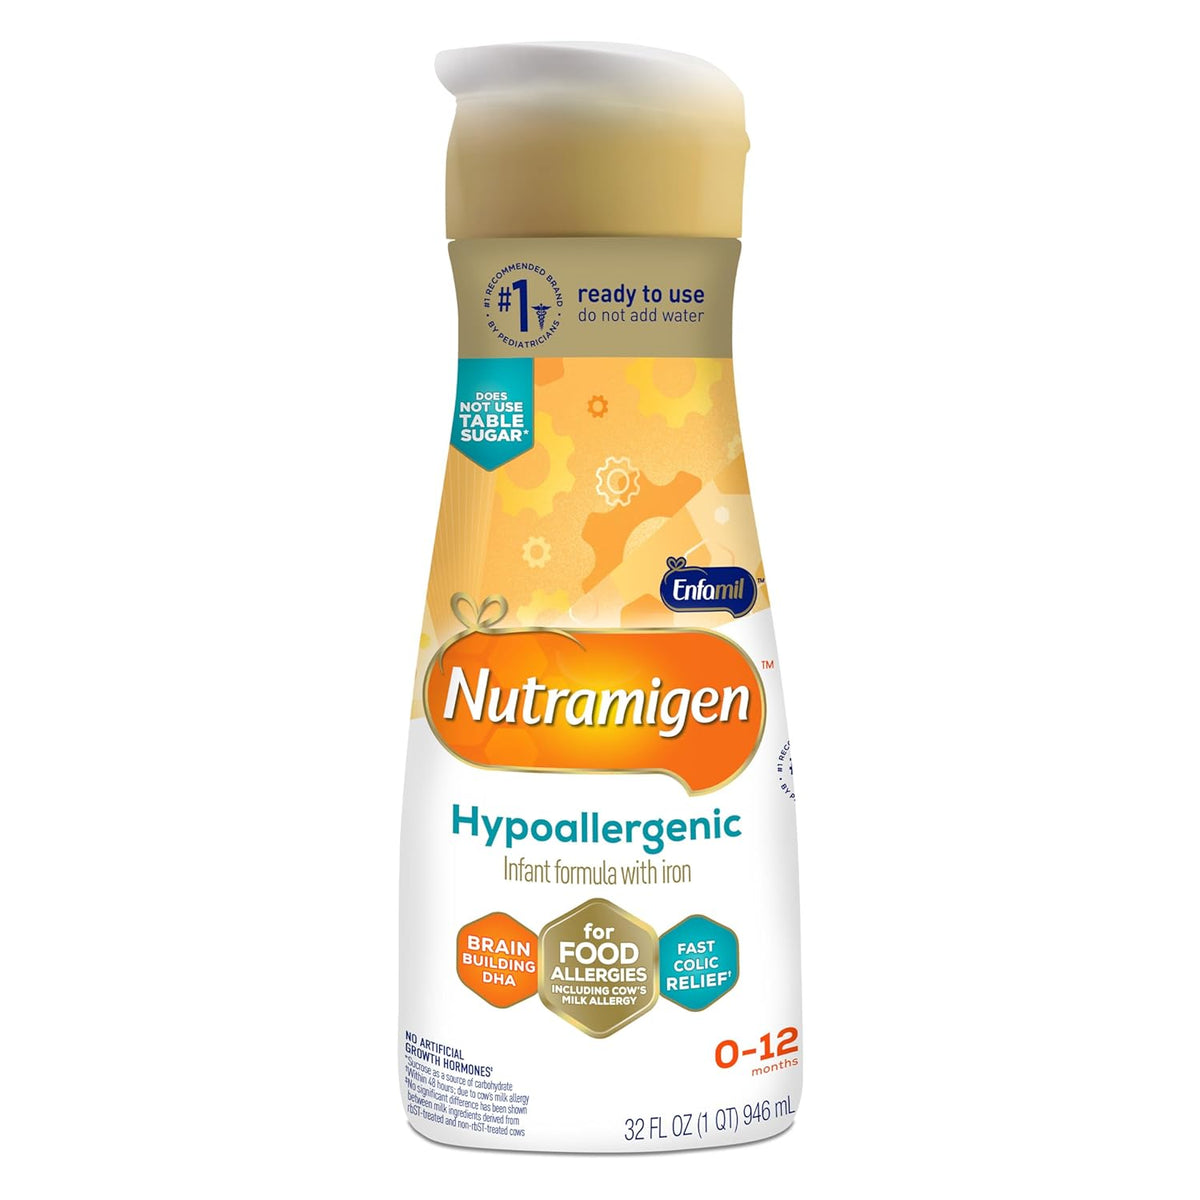 Enfamil Nutramigen Hypoallergenic Baby Formula, Lactose Free, Colic Relief from Cow's Milk Allergy Starts in 24 Hours, Brain Building Omega-3 DHA for Immune Support, 32 FL Oz